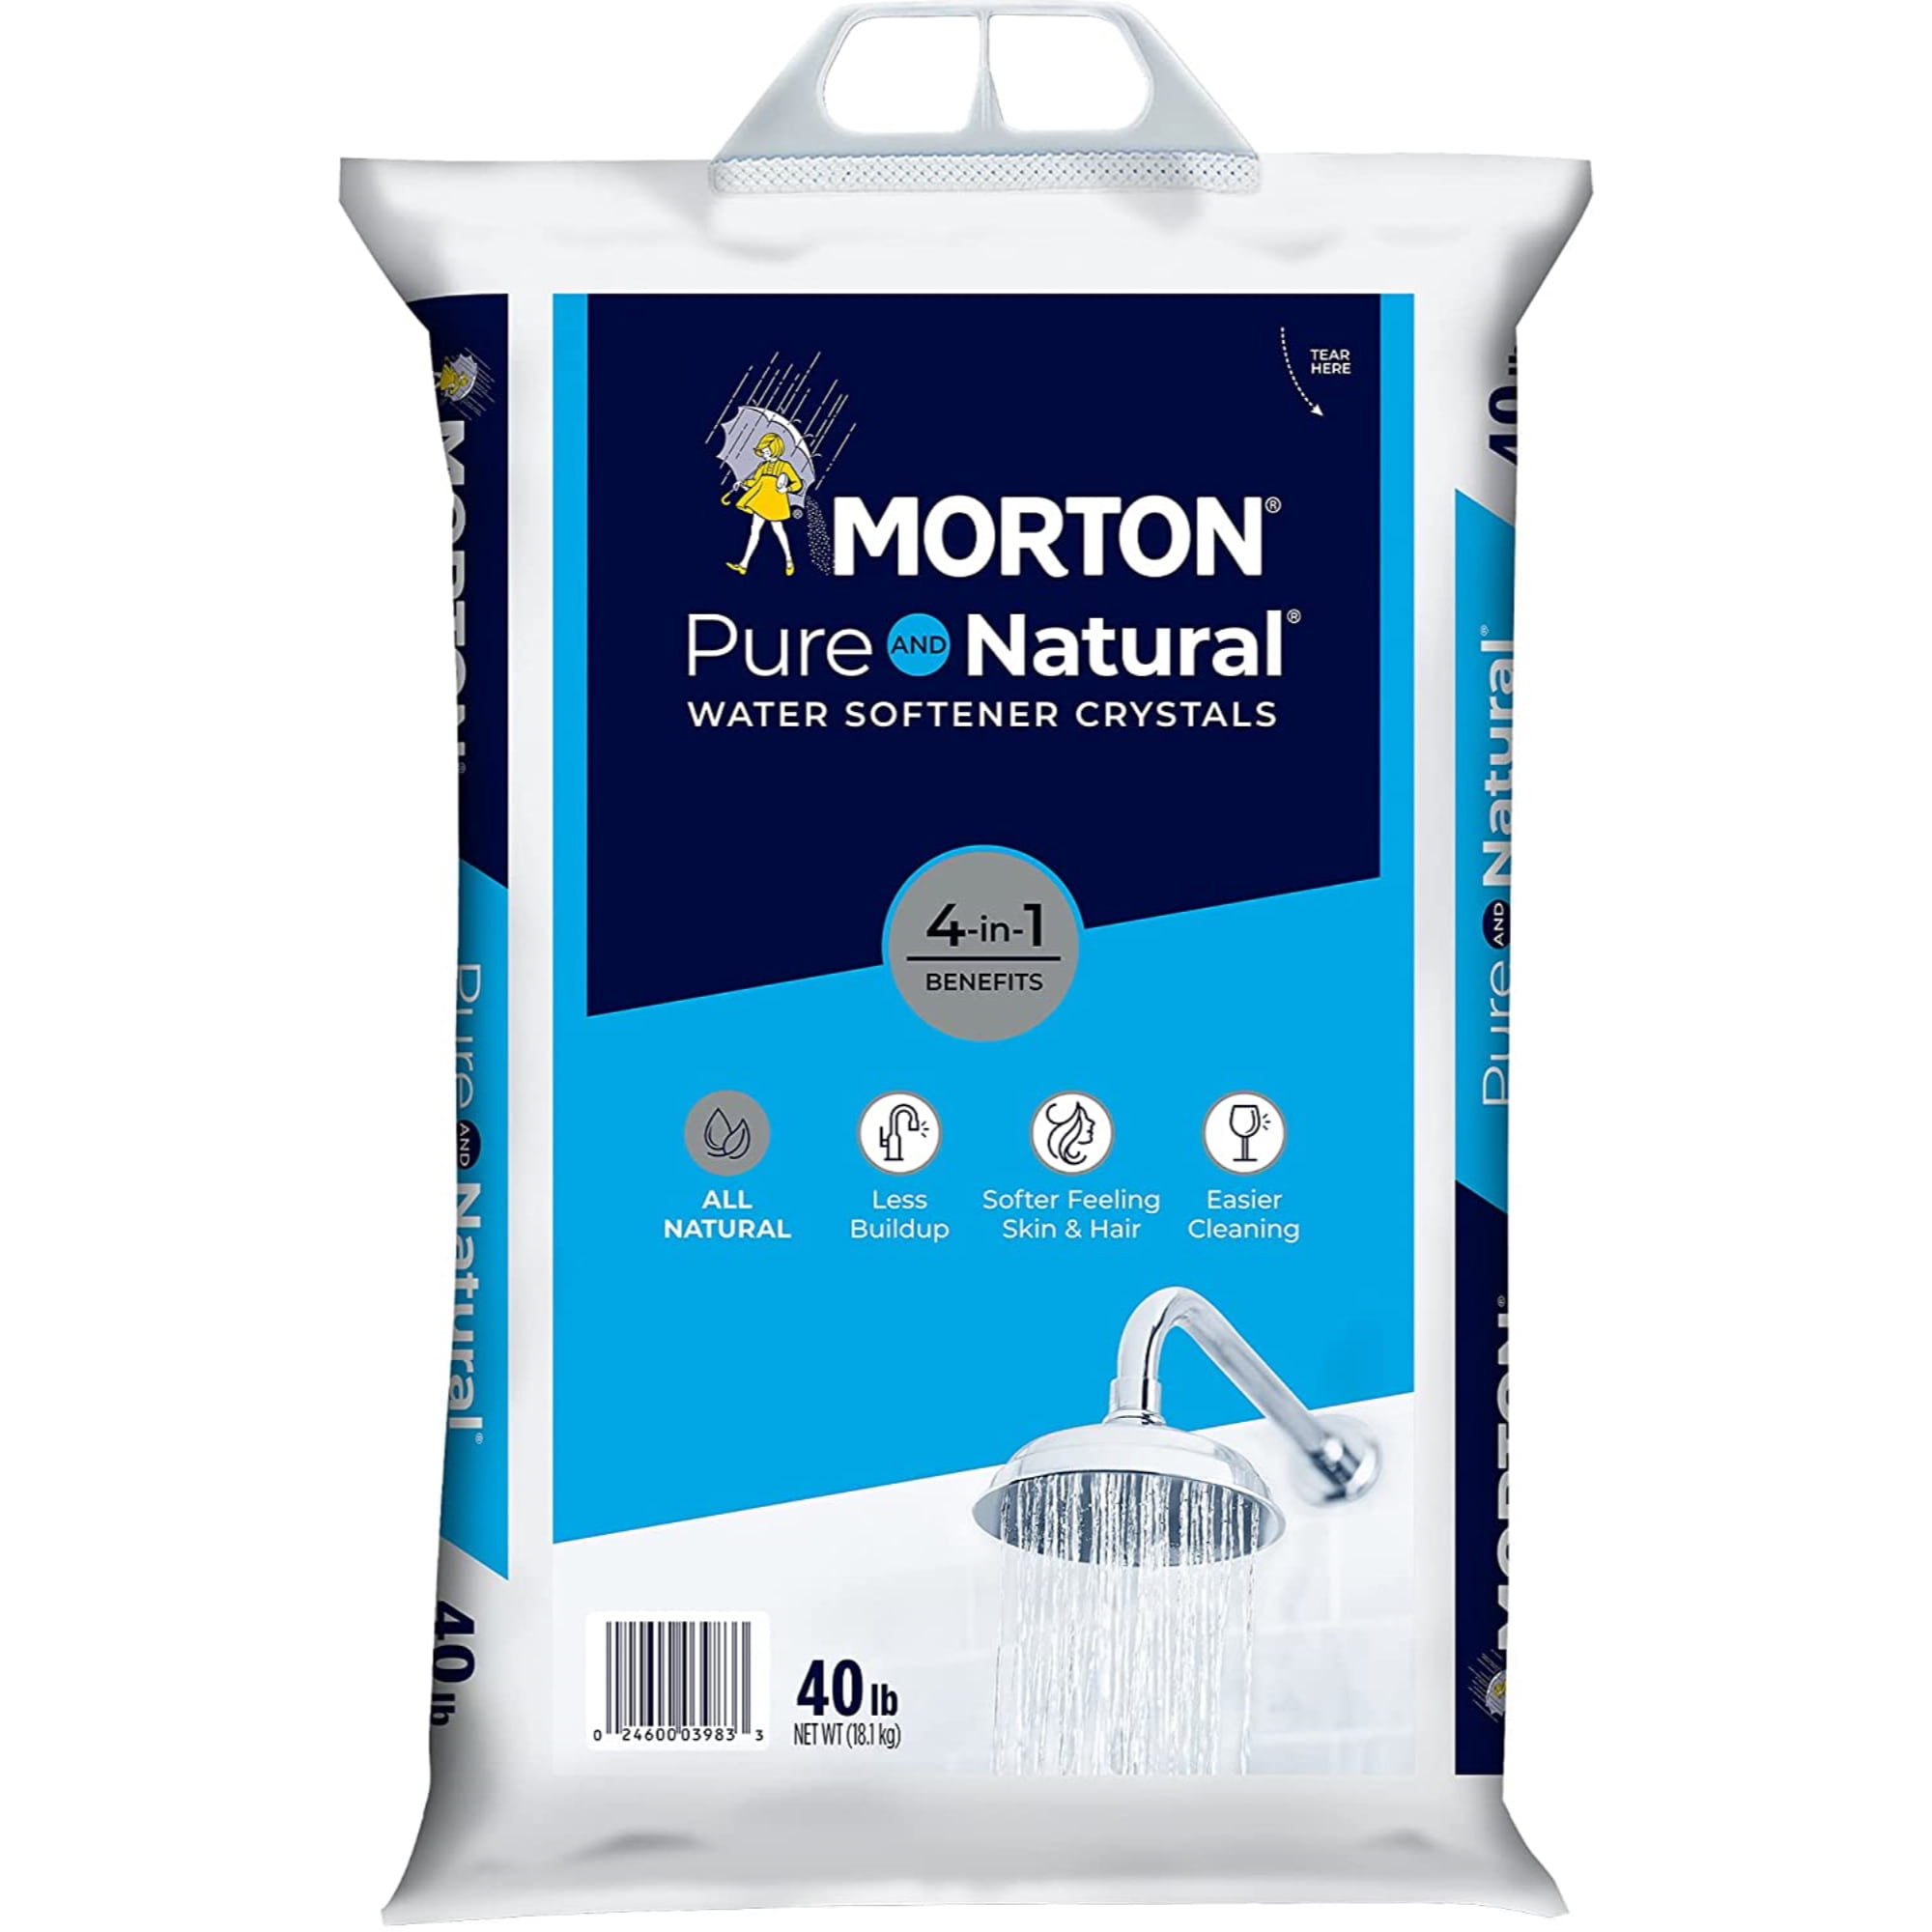 40-lb Morton Pure & Natural Water Softener Crystals $7.95 + Free shipping w/ Walmart+ or on orders $35+